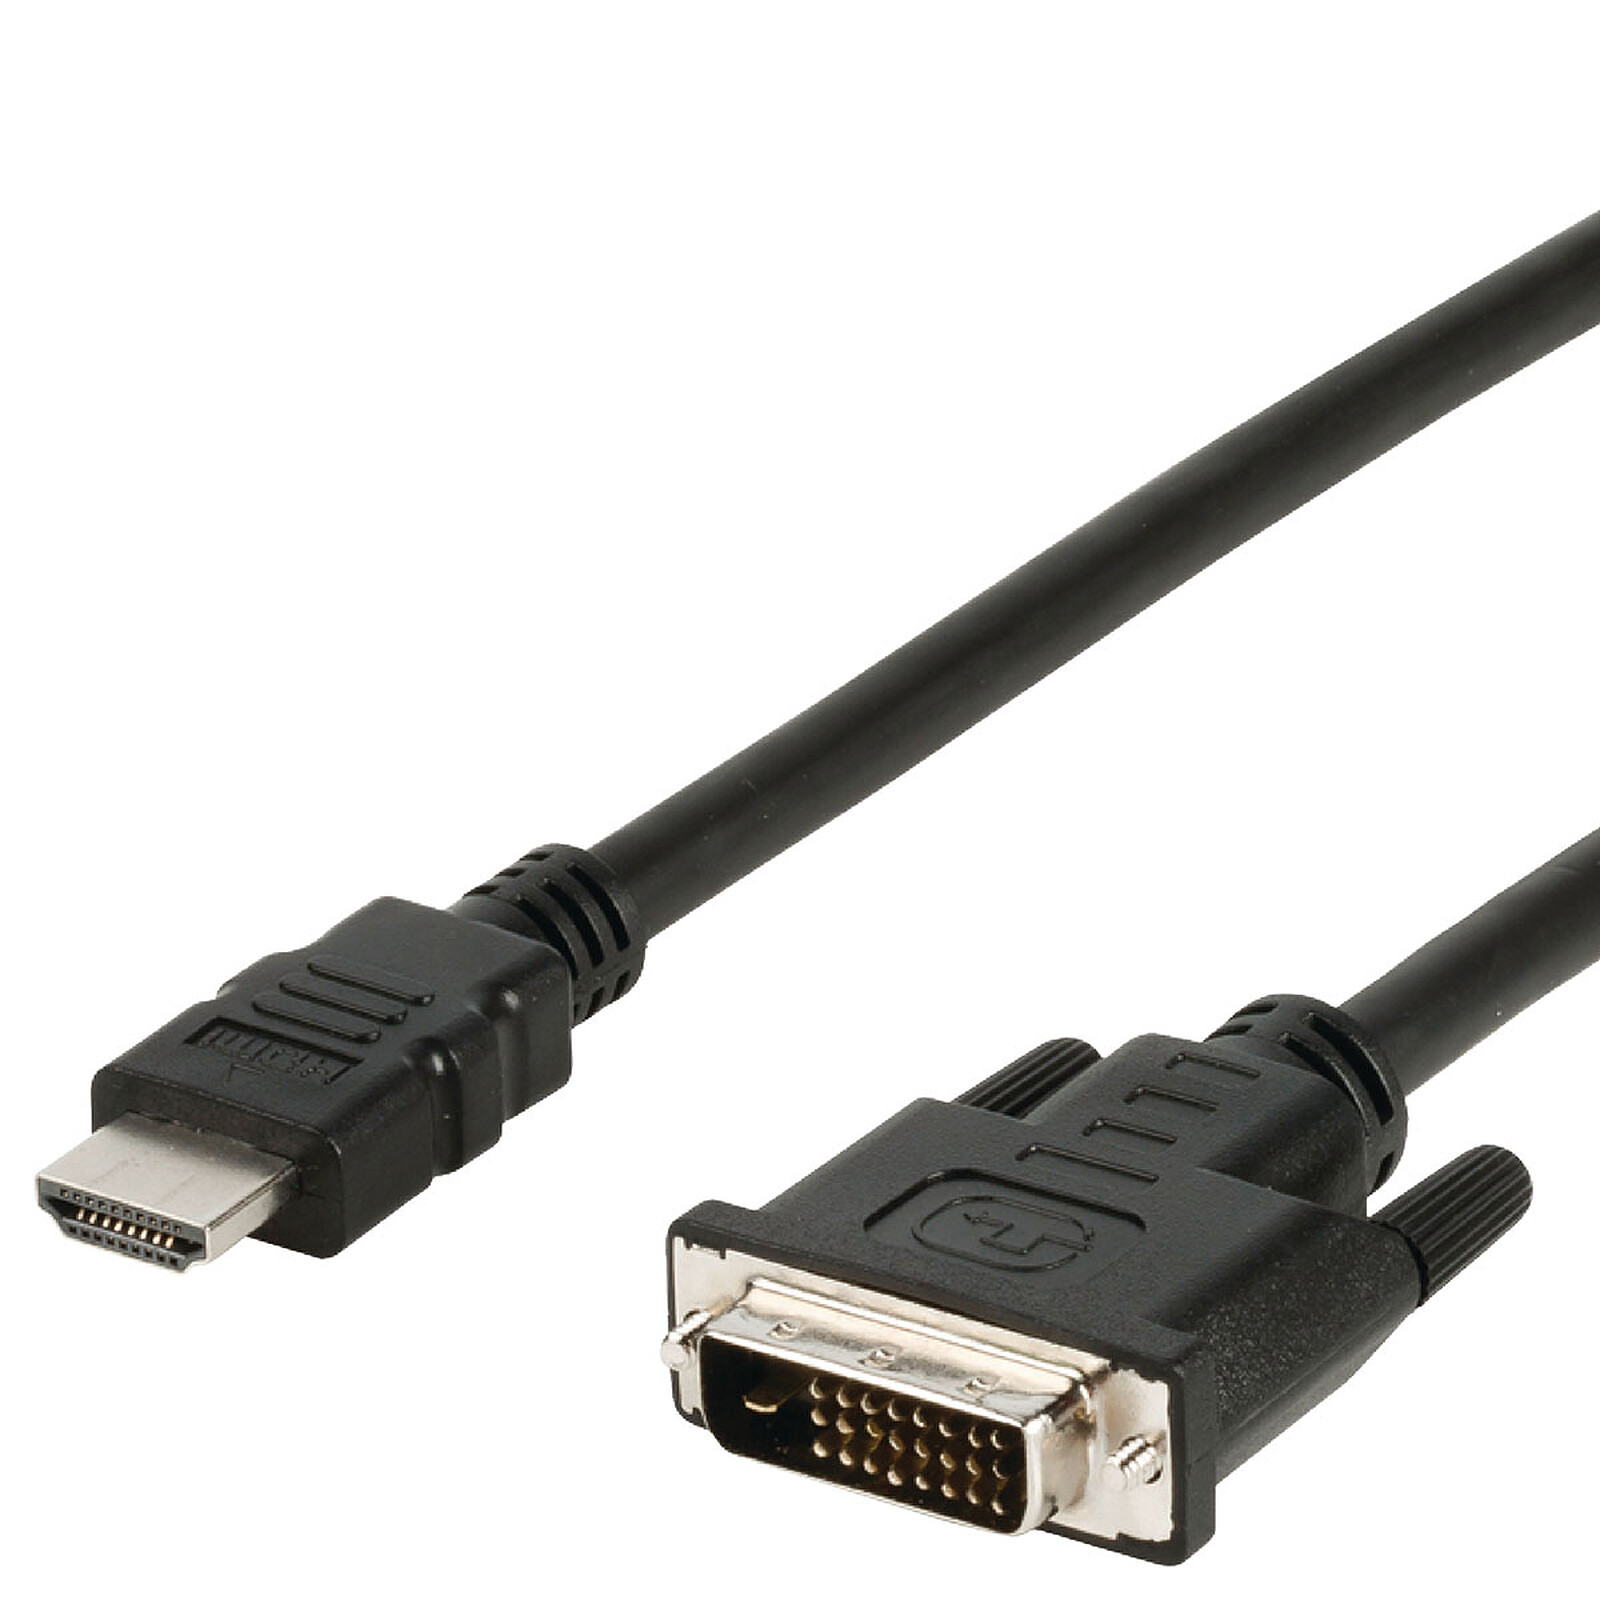 Overfladisk masse tavle DVI-D Dual Link Male / HDMI Male Cable (2 meters) - DVI Generic on LDLC